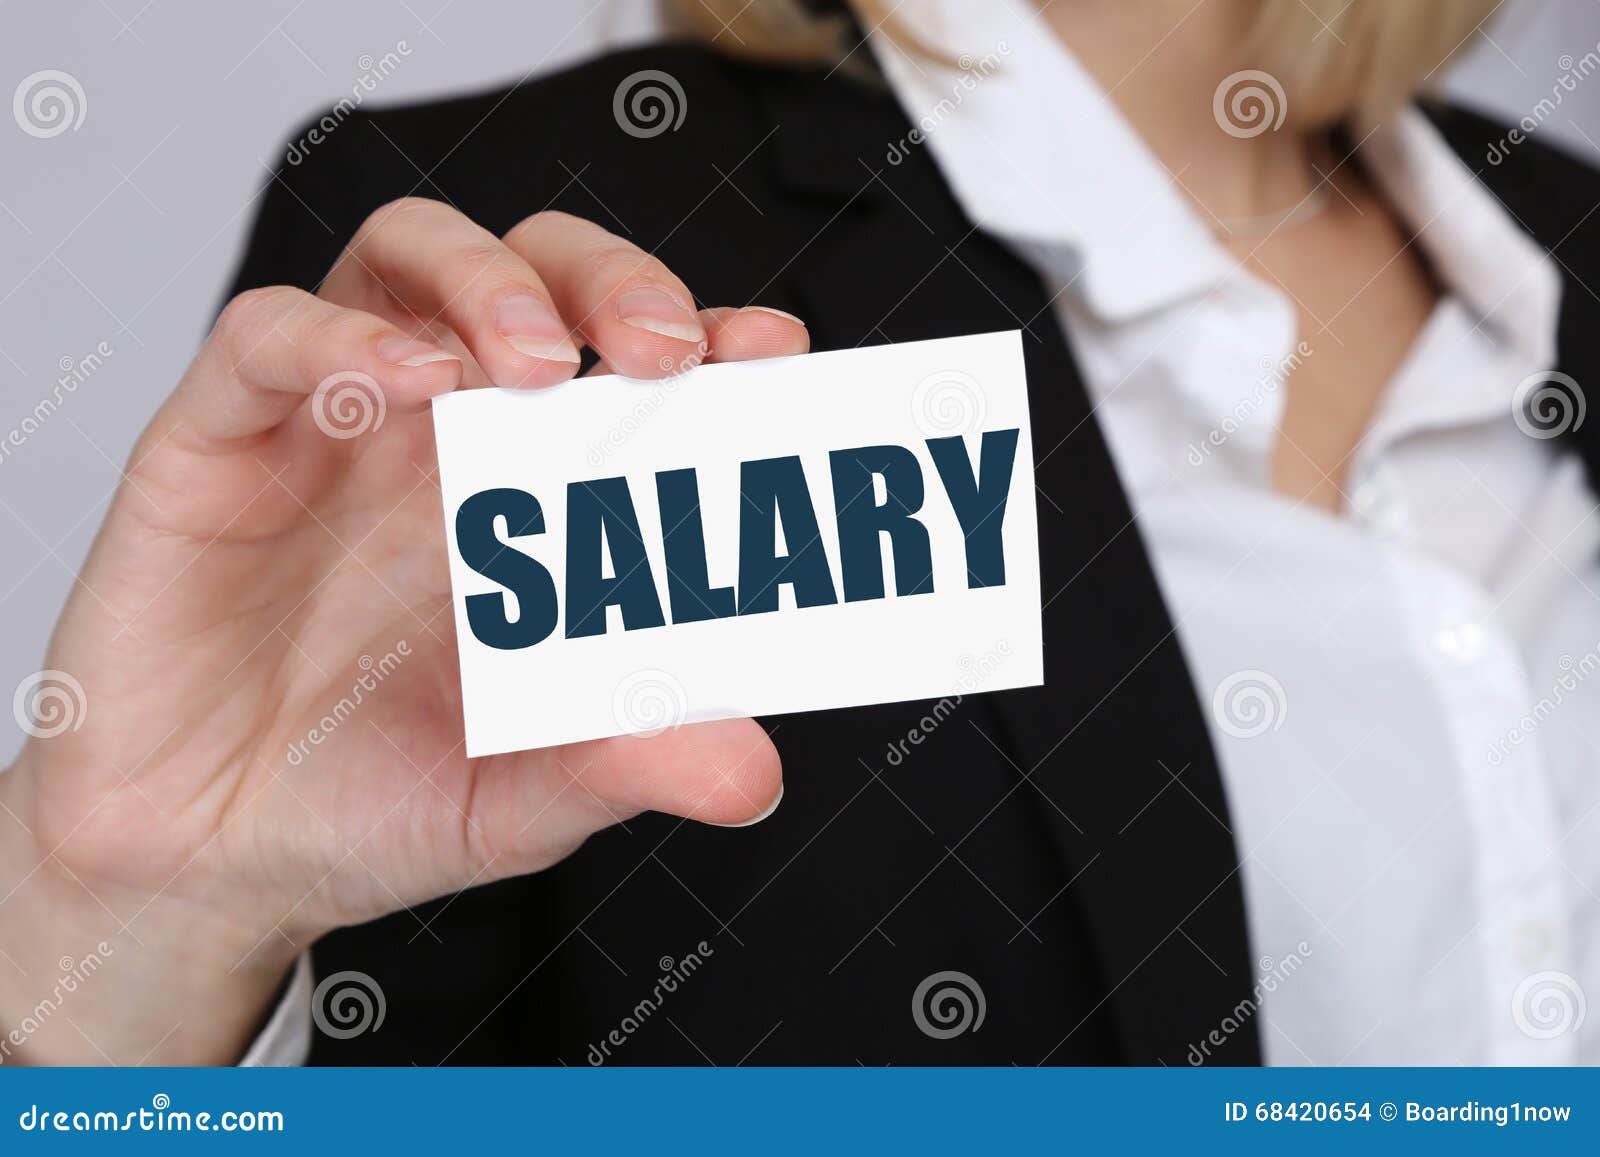 salary increase negotiation wages money finance business concept